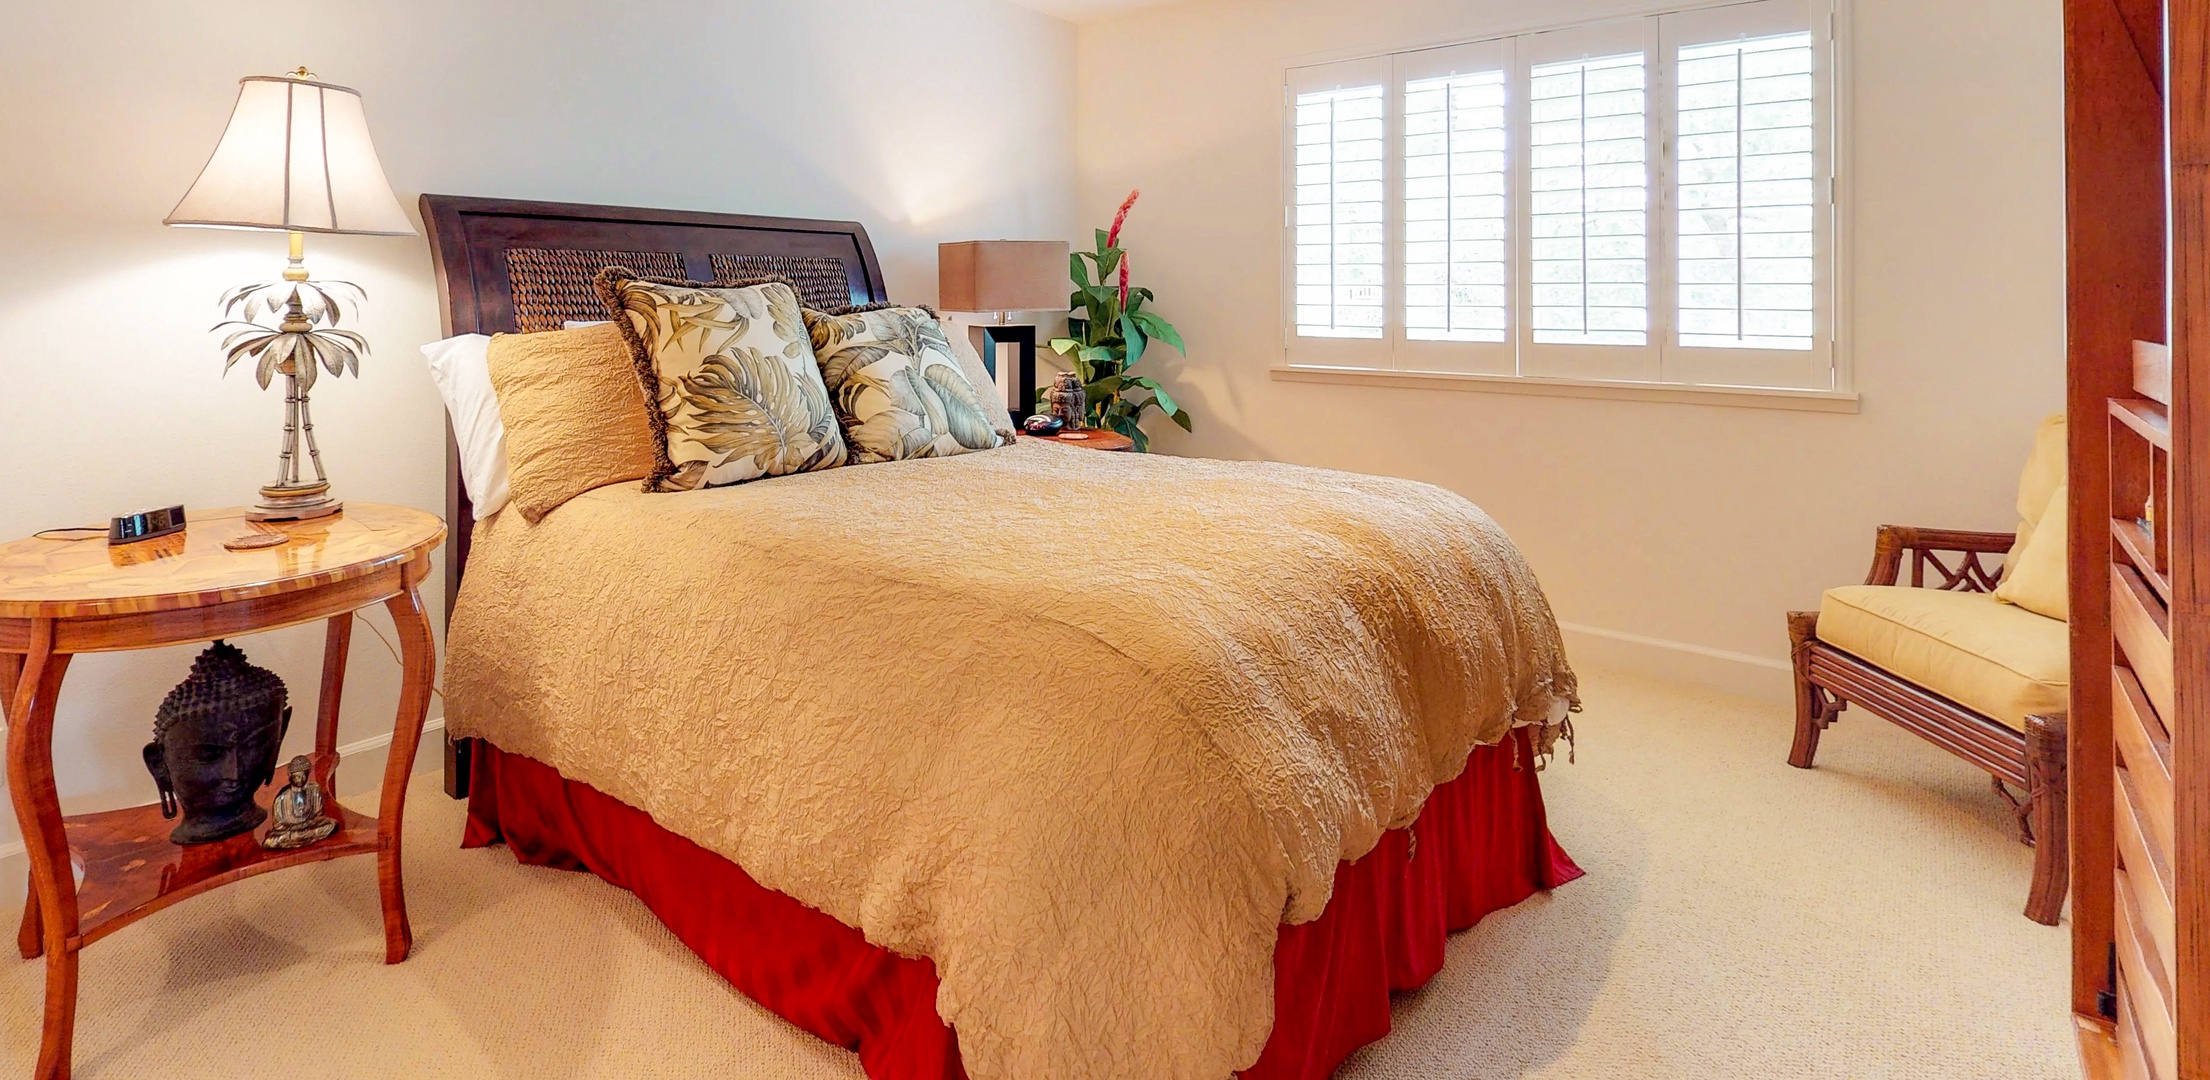 Kapolei Vacation Rentals, Ko Olina Kai 1105E - Bright and airy primary bedroom with a king bed.